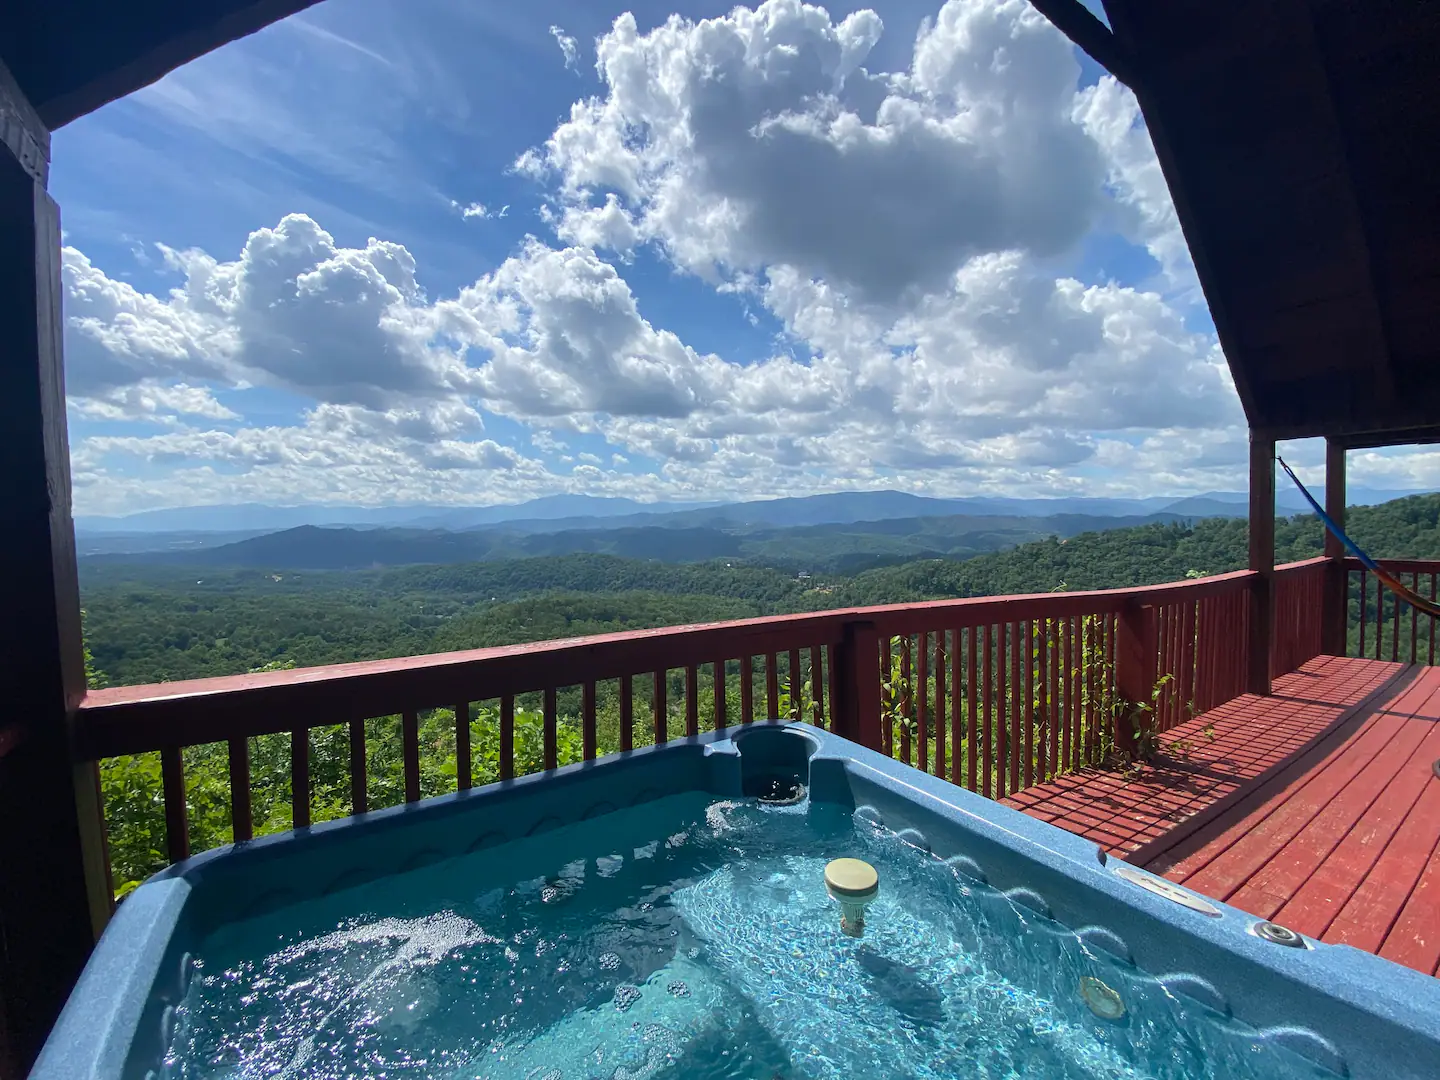 Couple can just sink in that hot tub and relax while admiring the amazing sights.